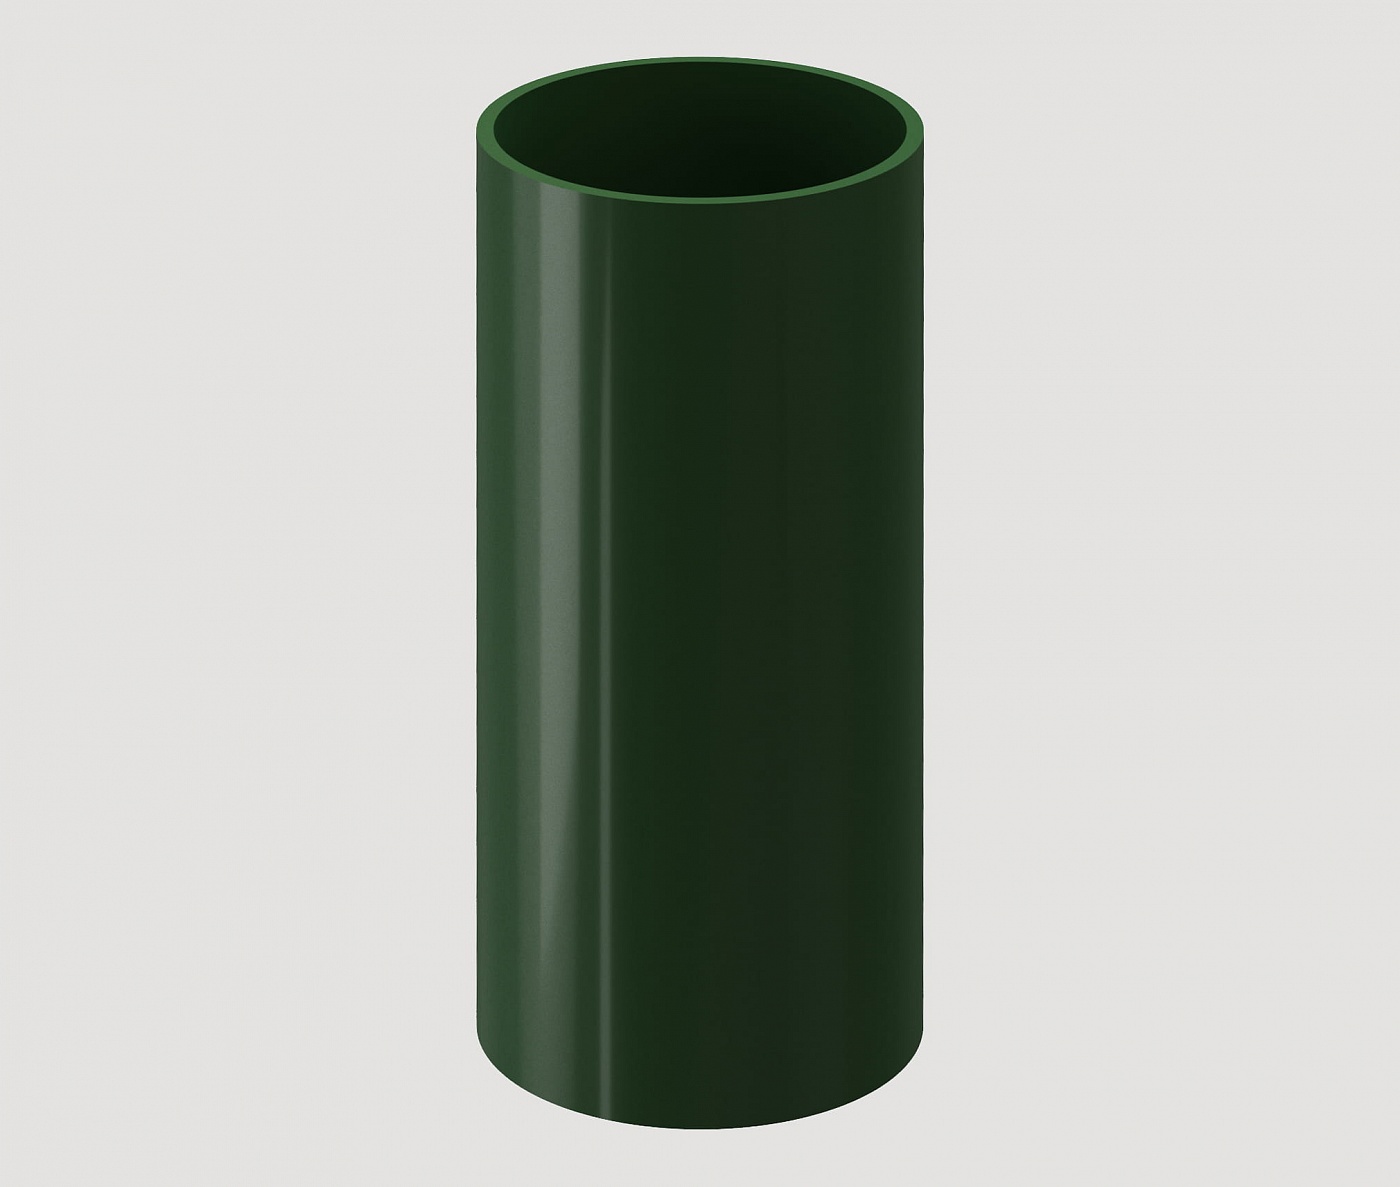 Водостоки - STANDARD SERIES Green RAL 6005 - Elements of the drainage system - Pipe 1m